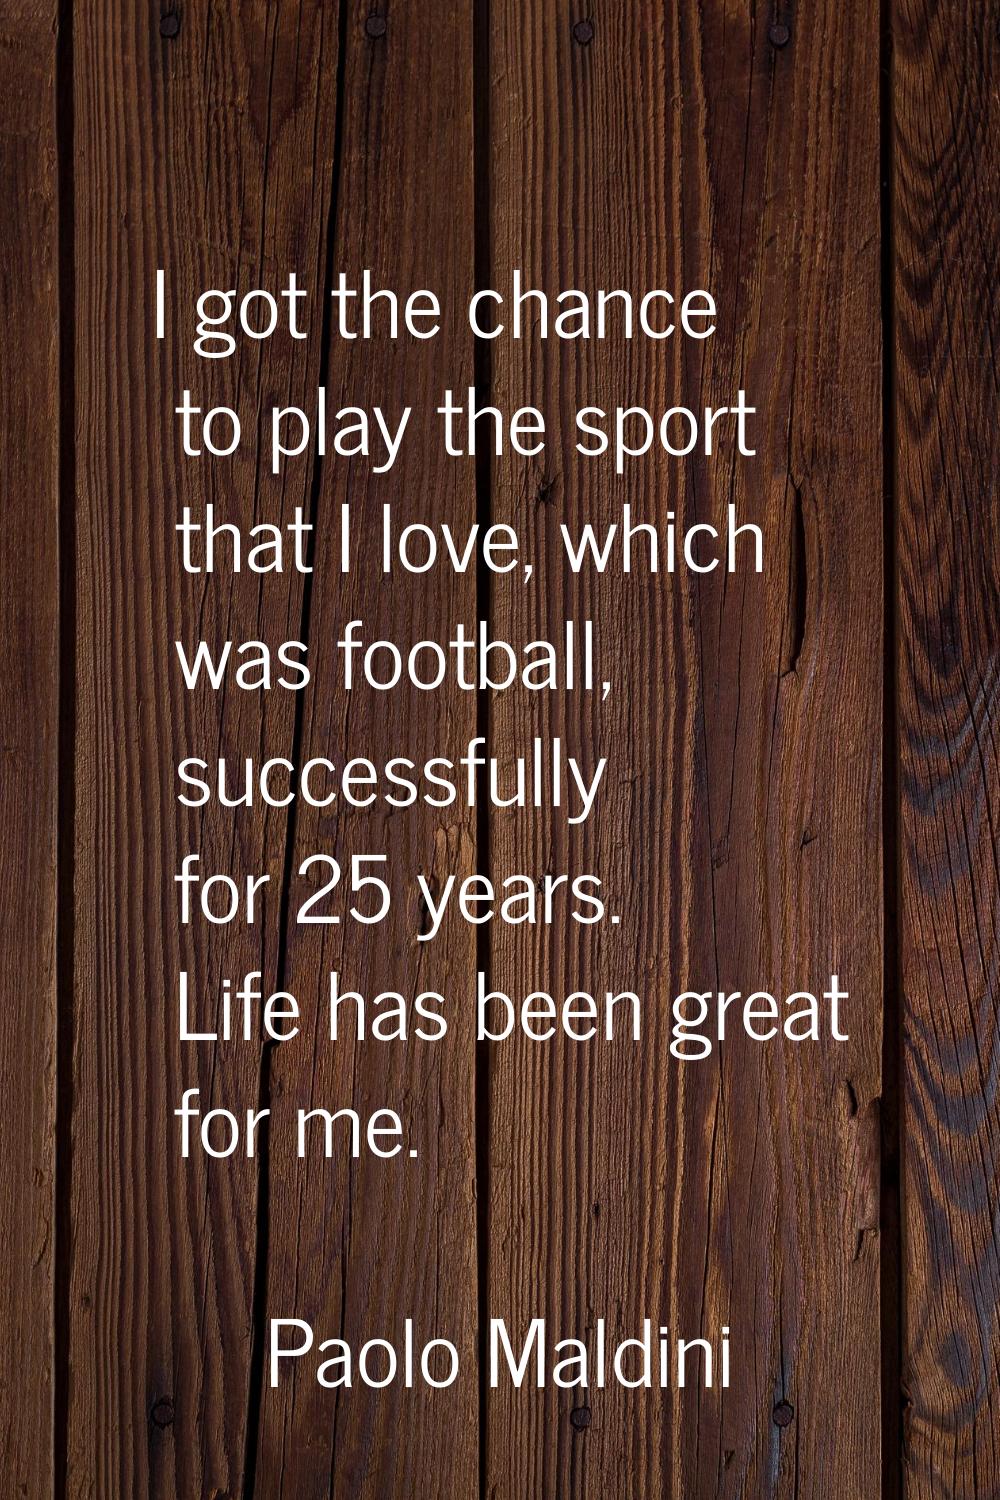 I got the chance to play the sport that I love, which was football, successfully for 25 years. Life